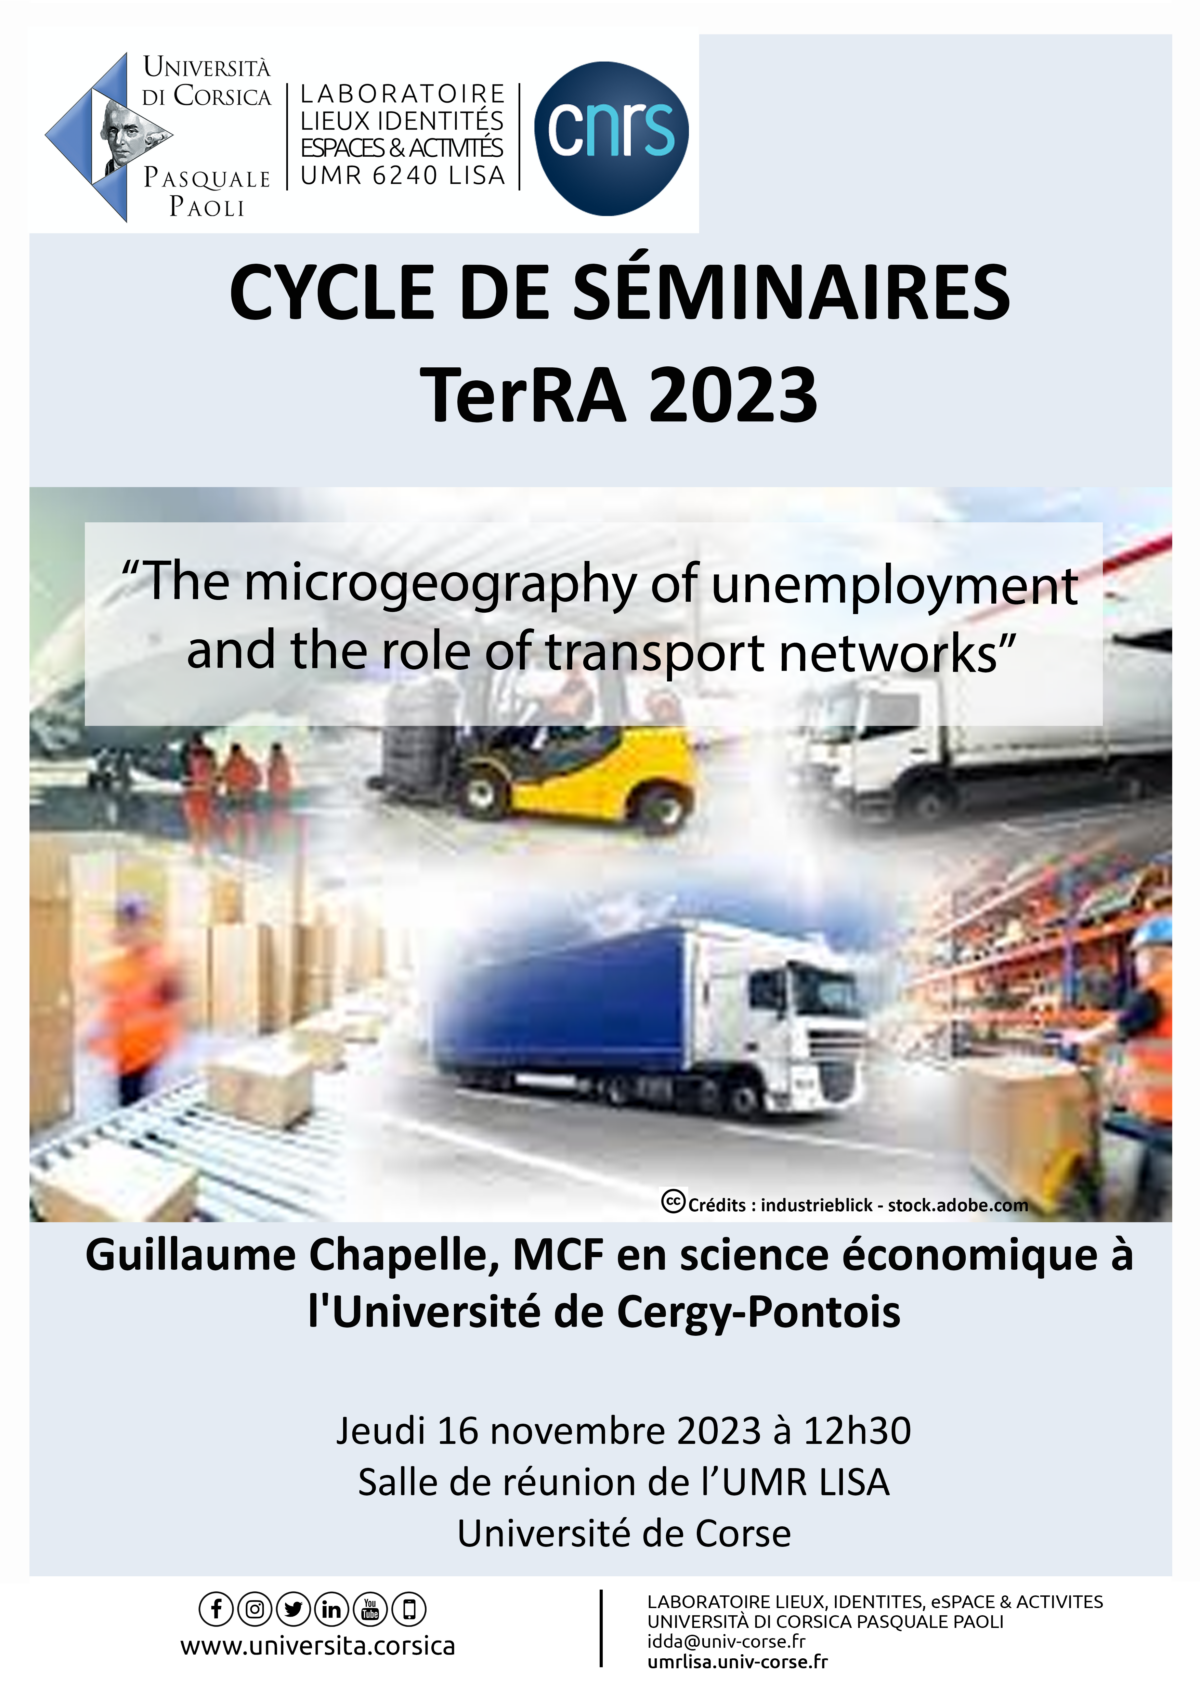 The microgeography of unemployment and the role of transport networks